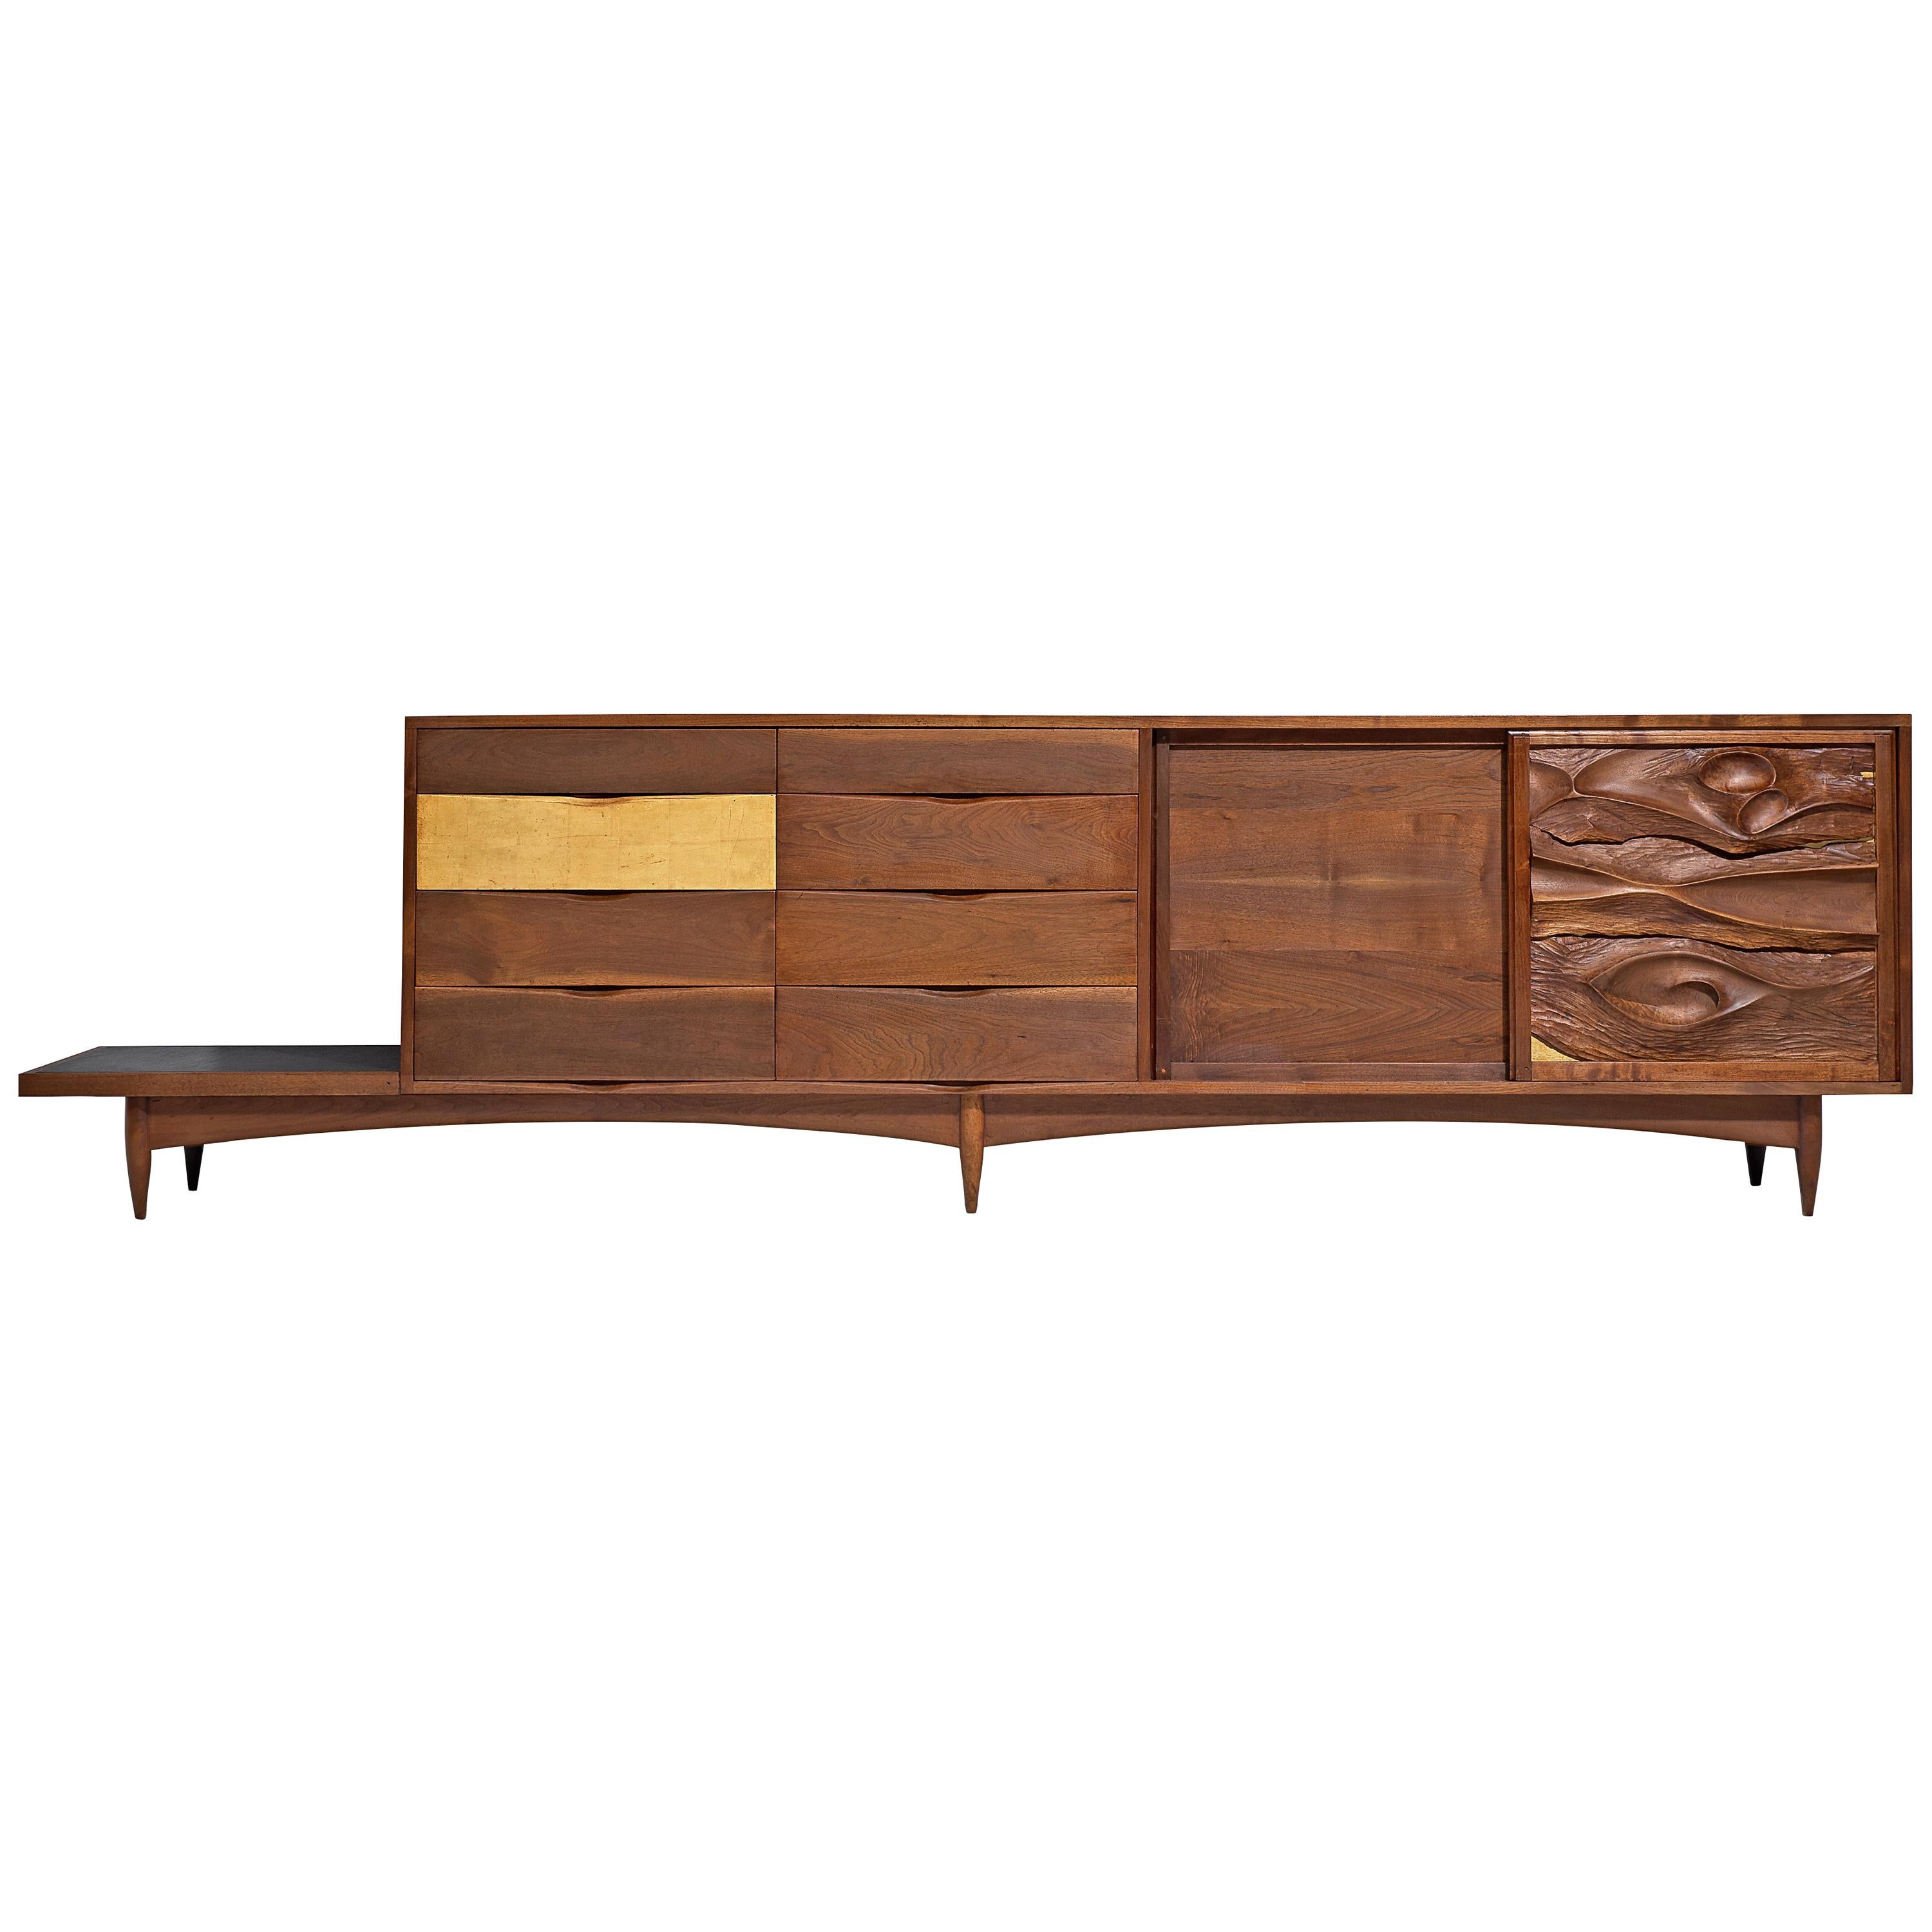 Large Phillip Lloyd Powell Sideboard in Solid American Walnut and Gold Leaf